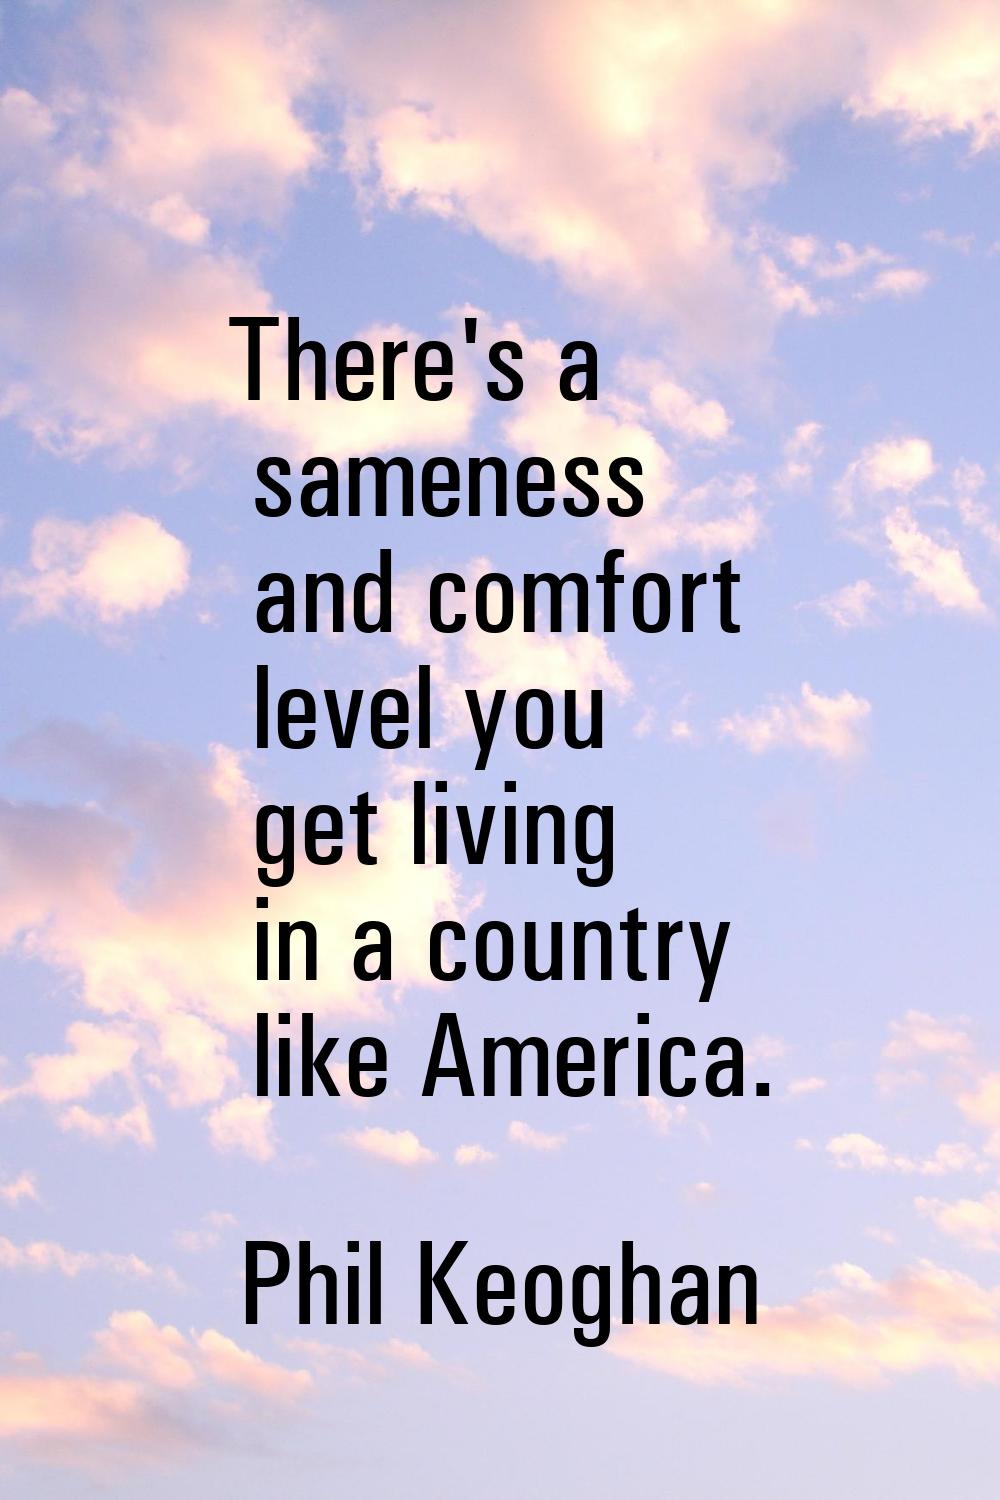 There's a sameness and comfort level you get living in a country like America.